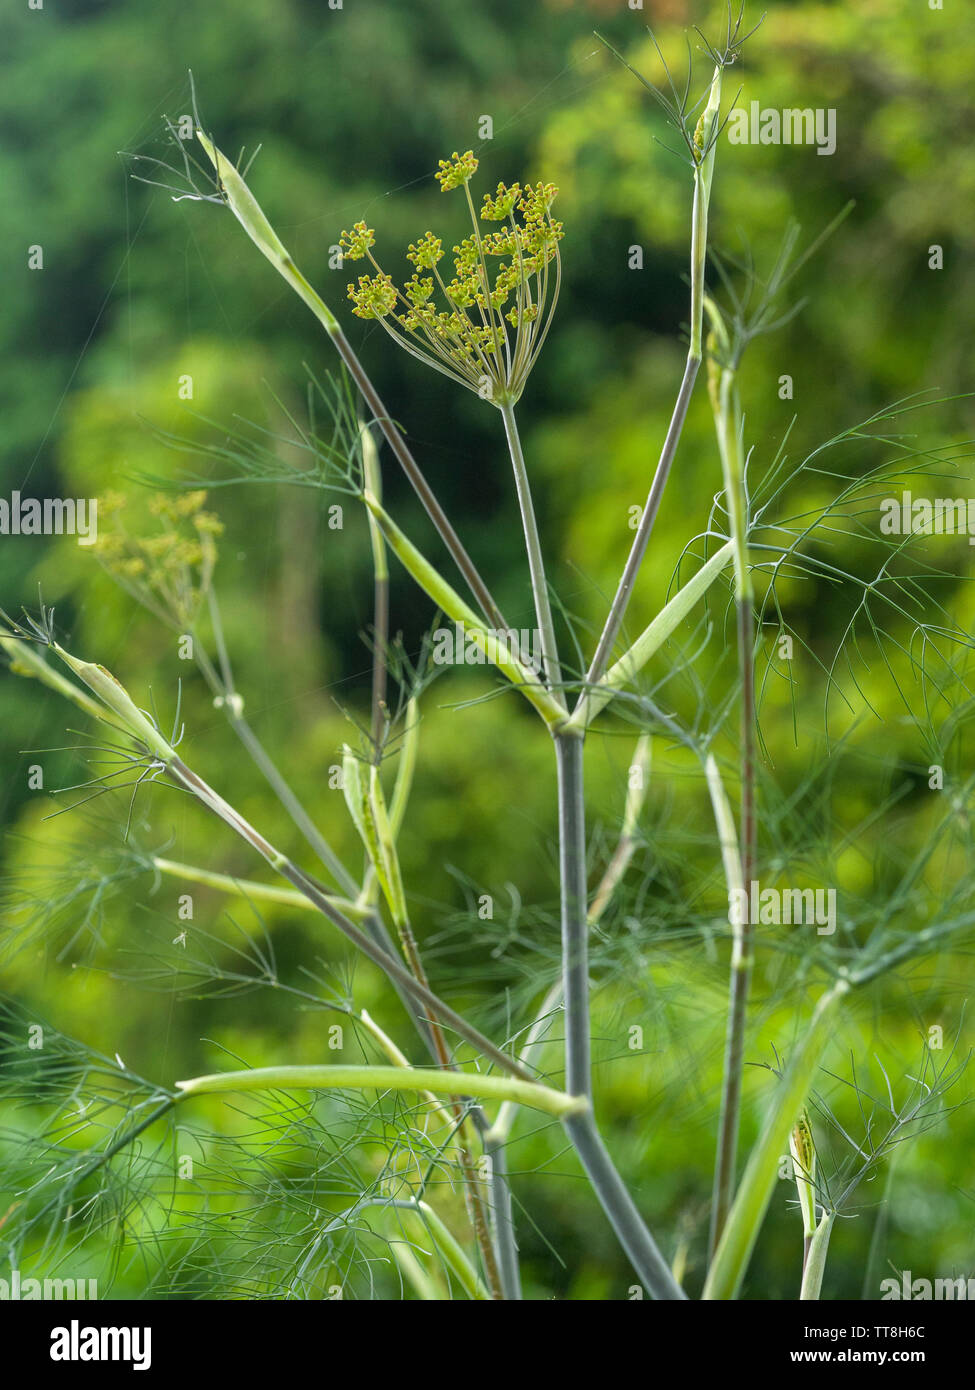 Fennel plant (Foeniculum vulgare) with flowerheads in garden Stock Photo